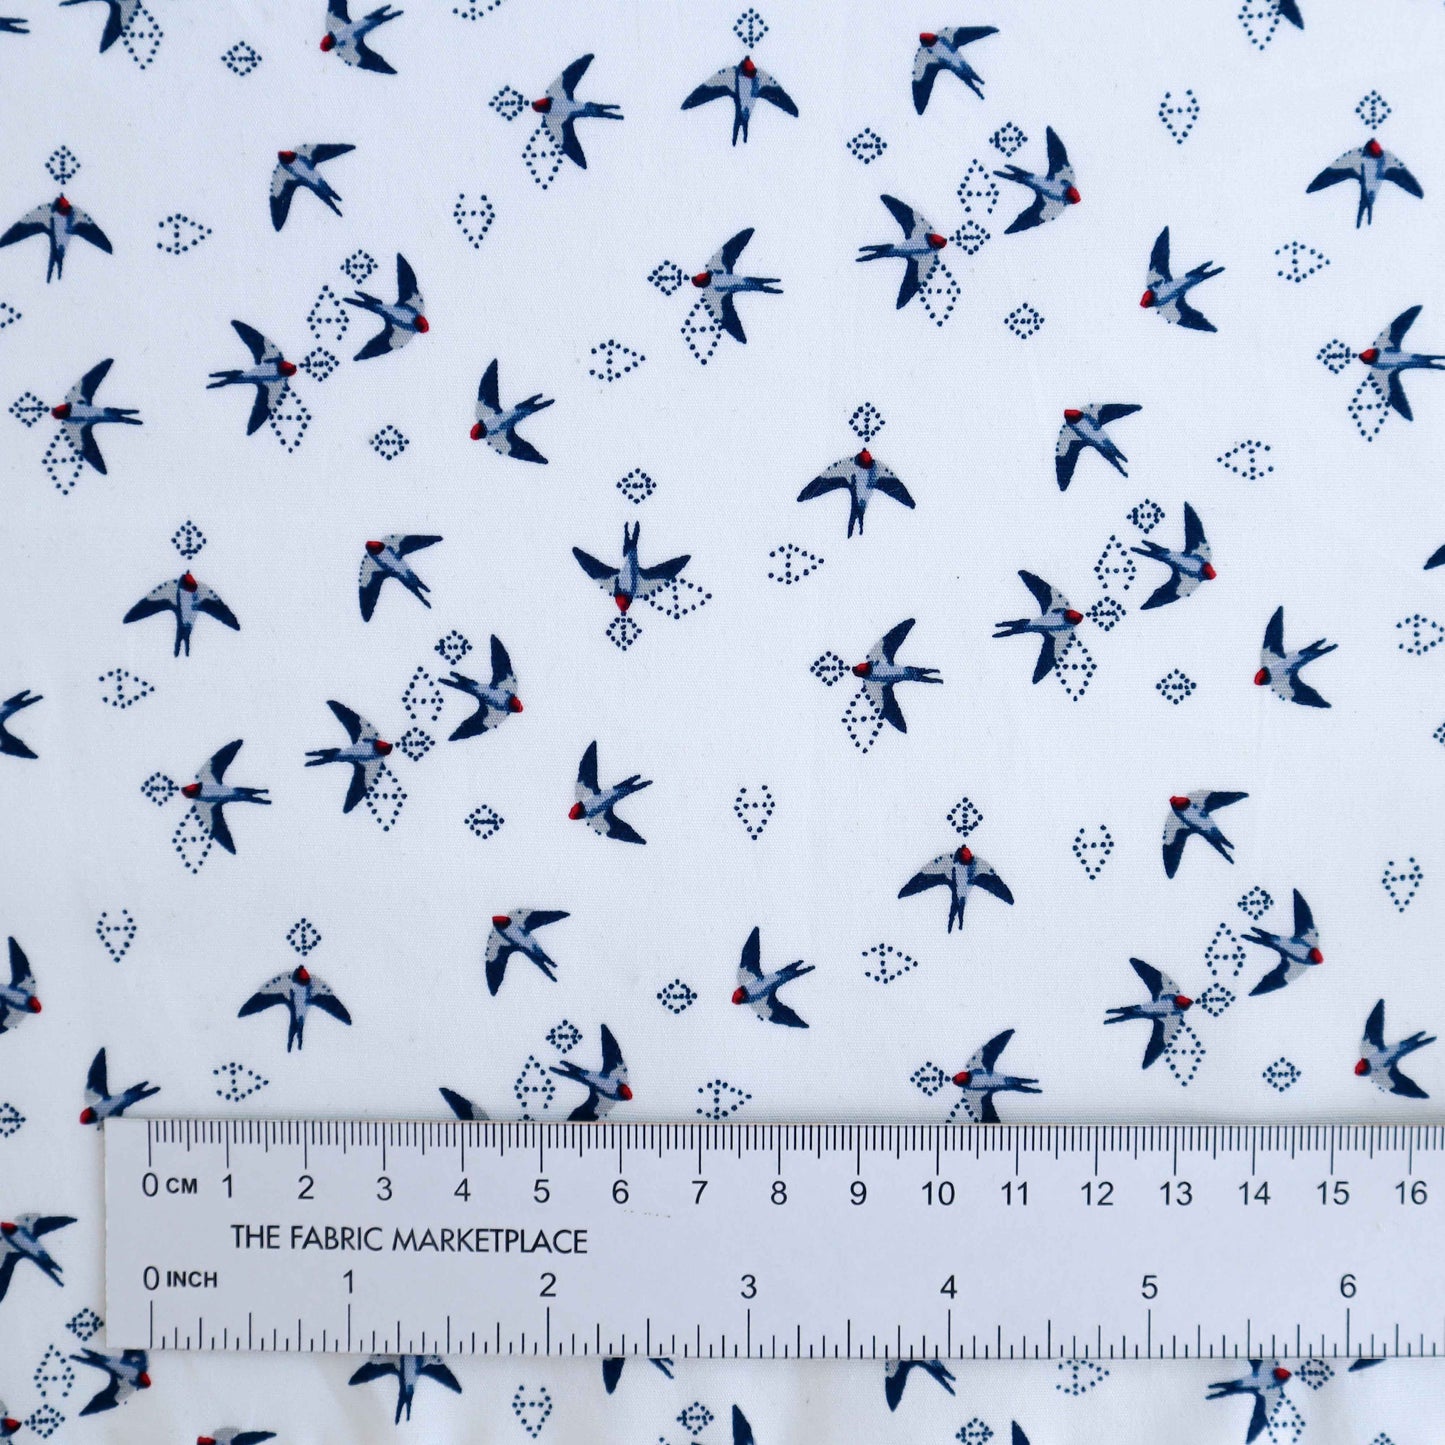 A lightweight Poplin fabric with dainty swallow prints. This breathable fabric is soft and durable.